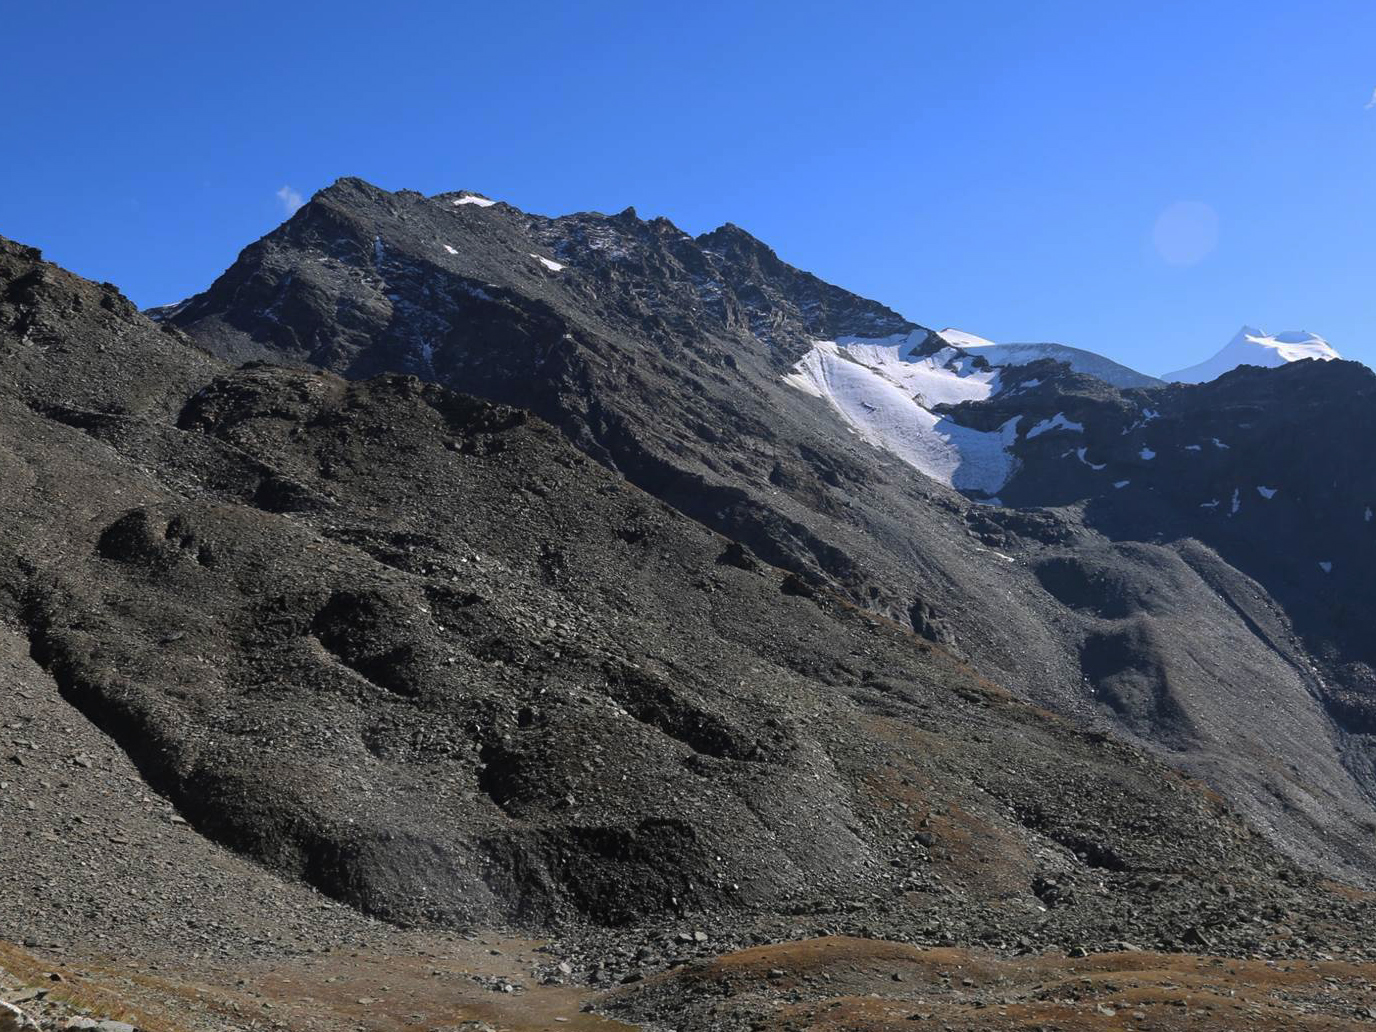 Enlarged view: The surface of the rock glacier pictured on the left in the canton of Valais is changing rapidly as it moves downhill at a steadily increasing pace.